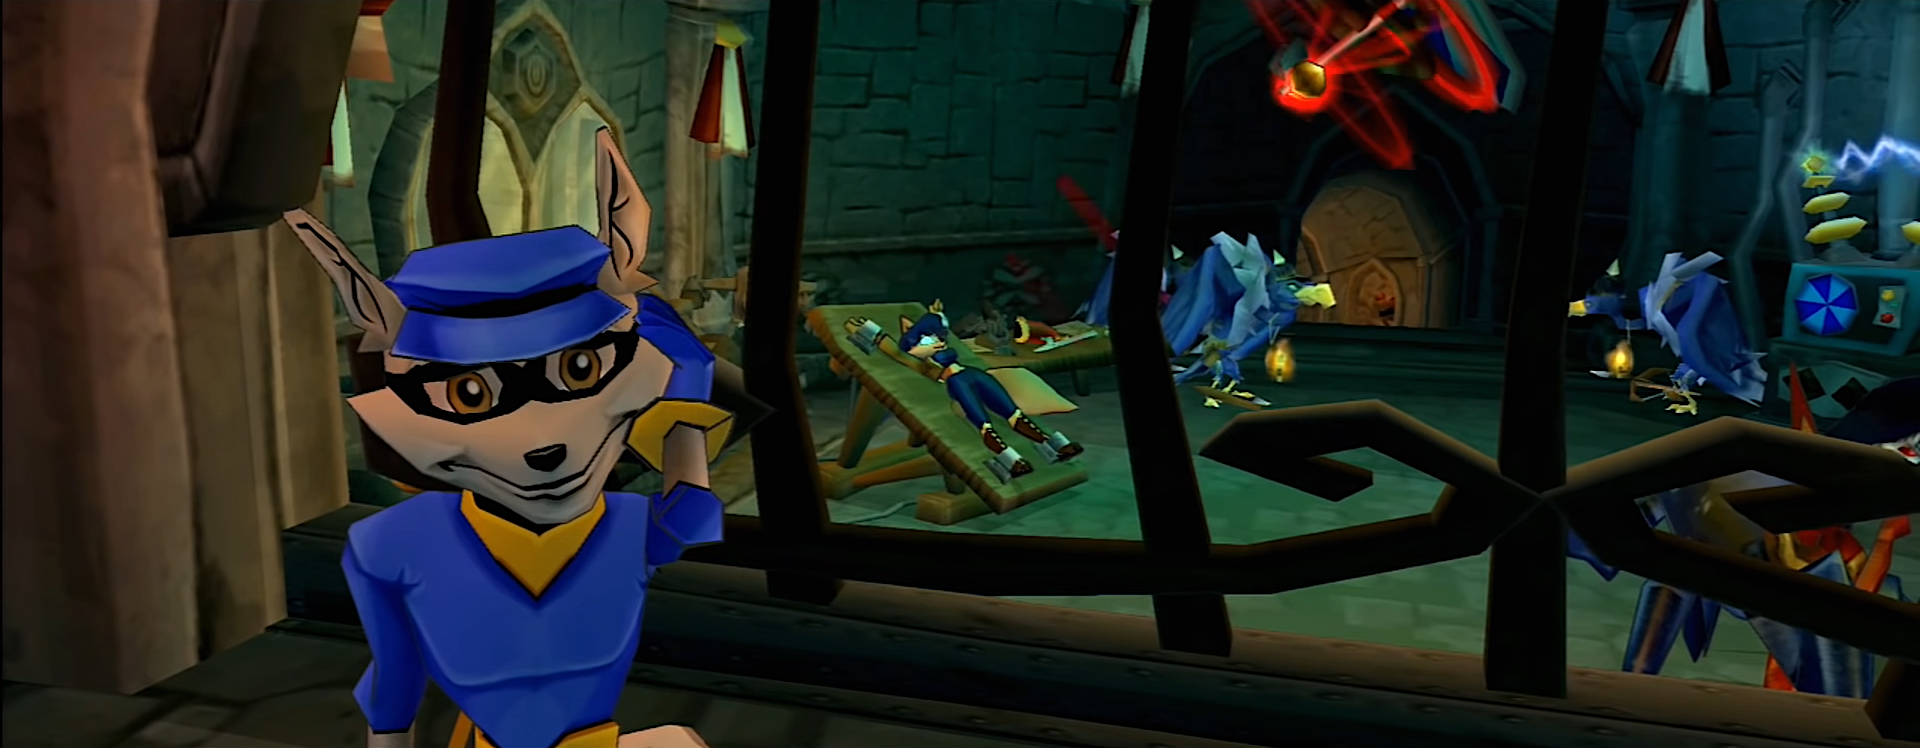 Review: Sly Cooper is such a steal it's criminal! - UNF Spinnaker